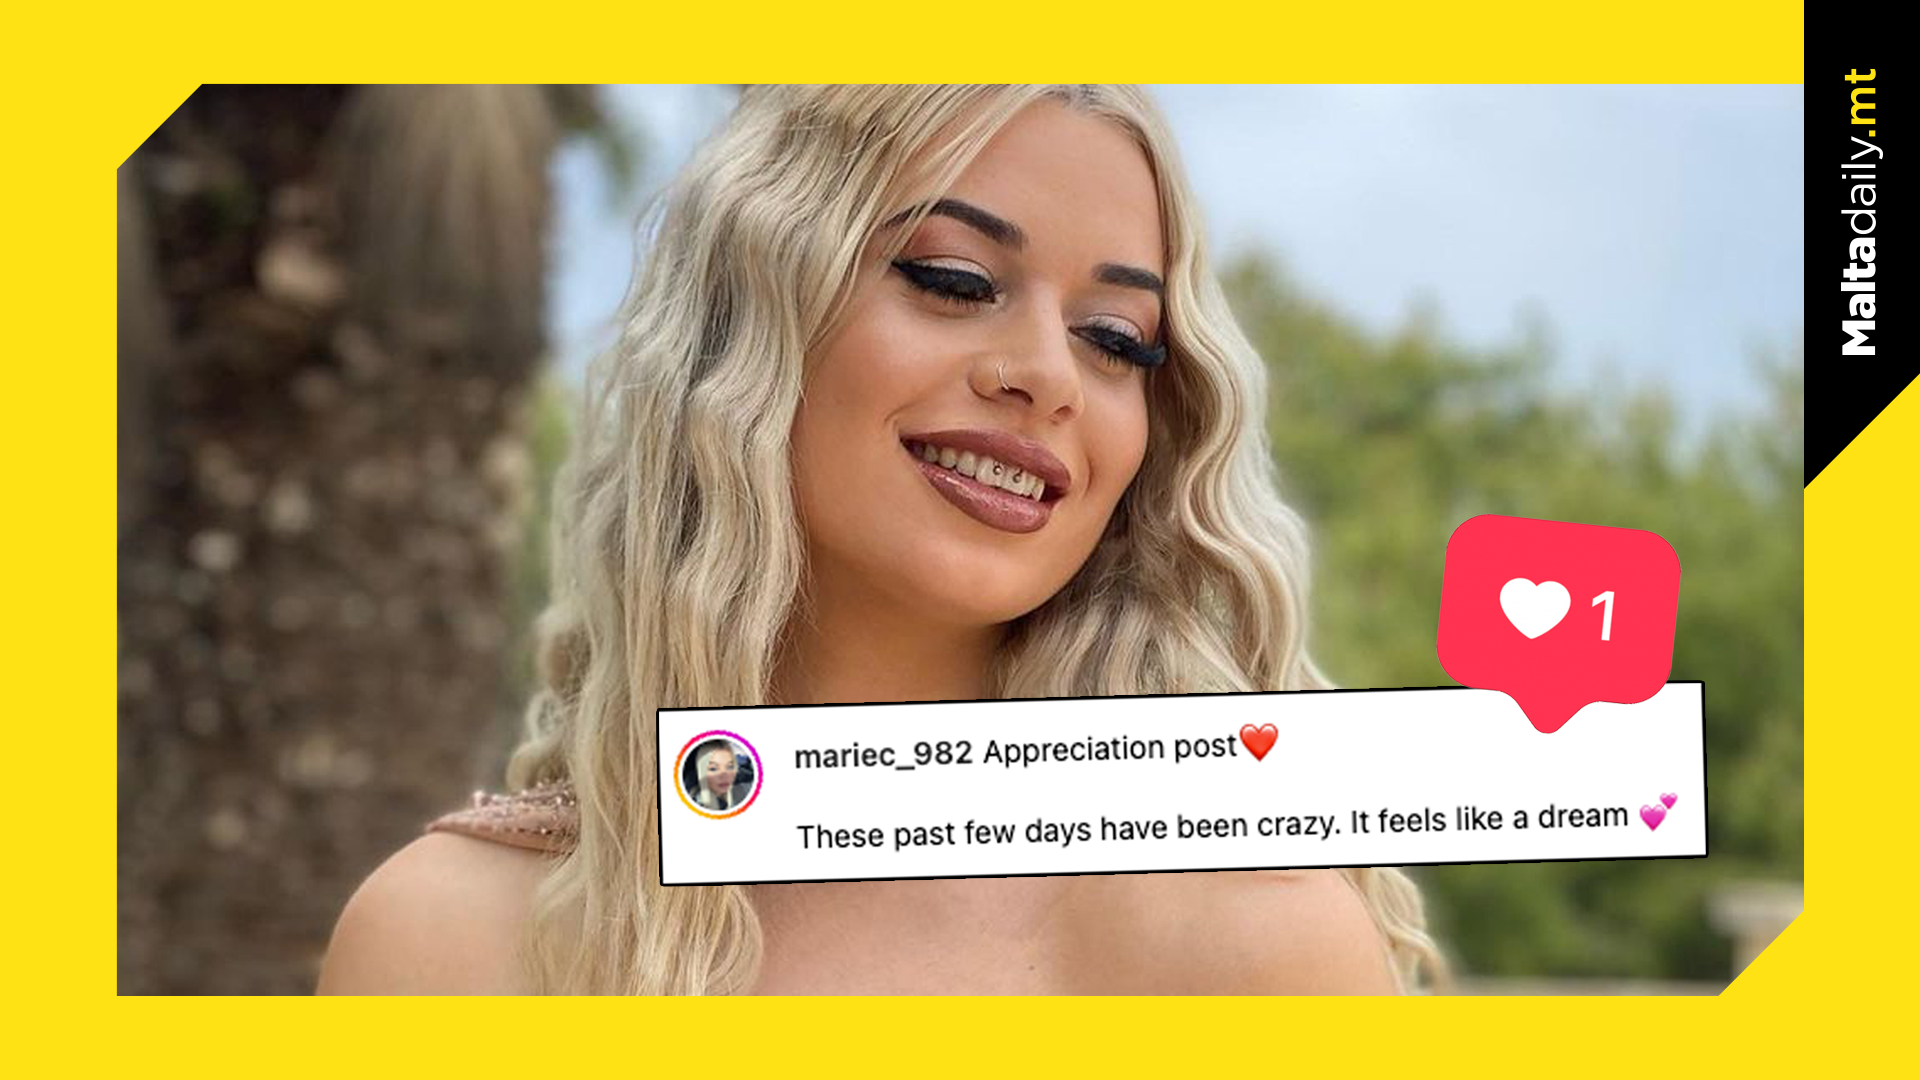 Marie Christine Expresses Gratitude and Reflects on Her Love Island Journey